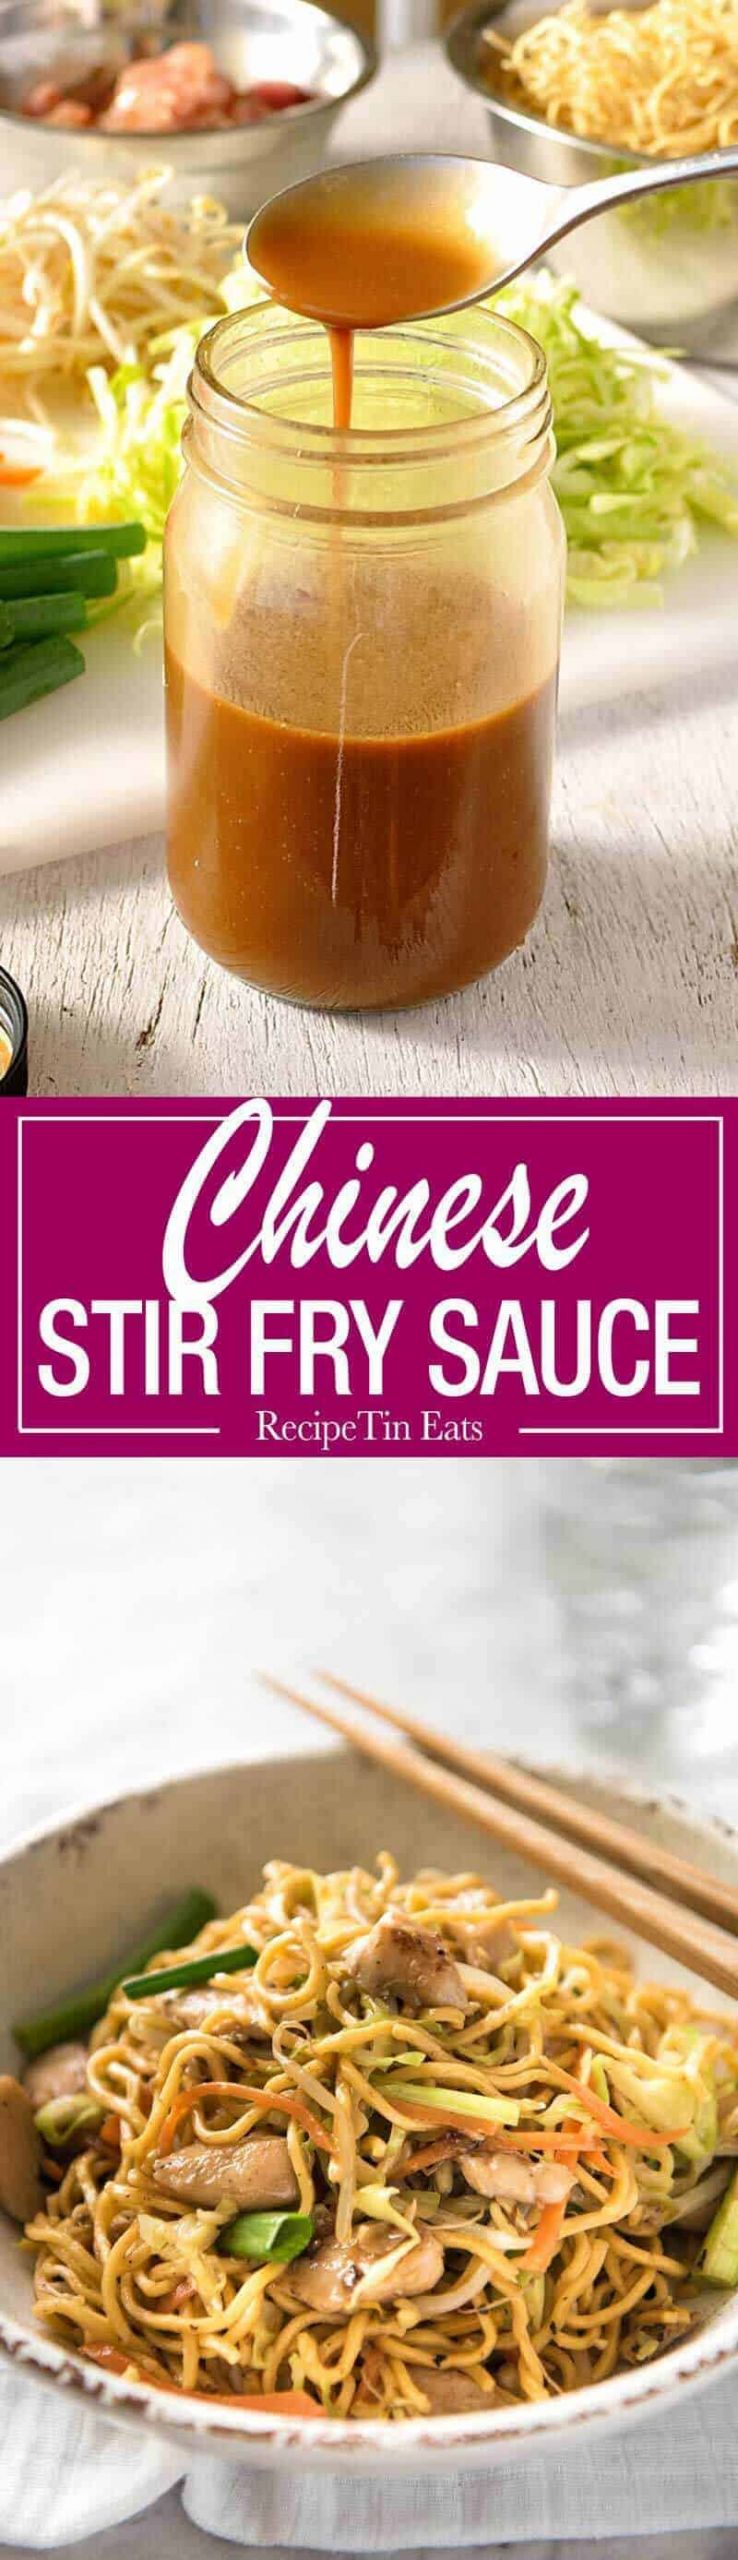 Stir Fry Sauces Recipes
 Real Chinese All Purpose Stir Fry Sauce